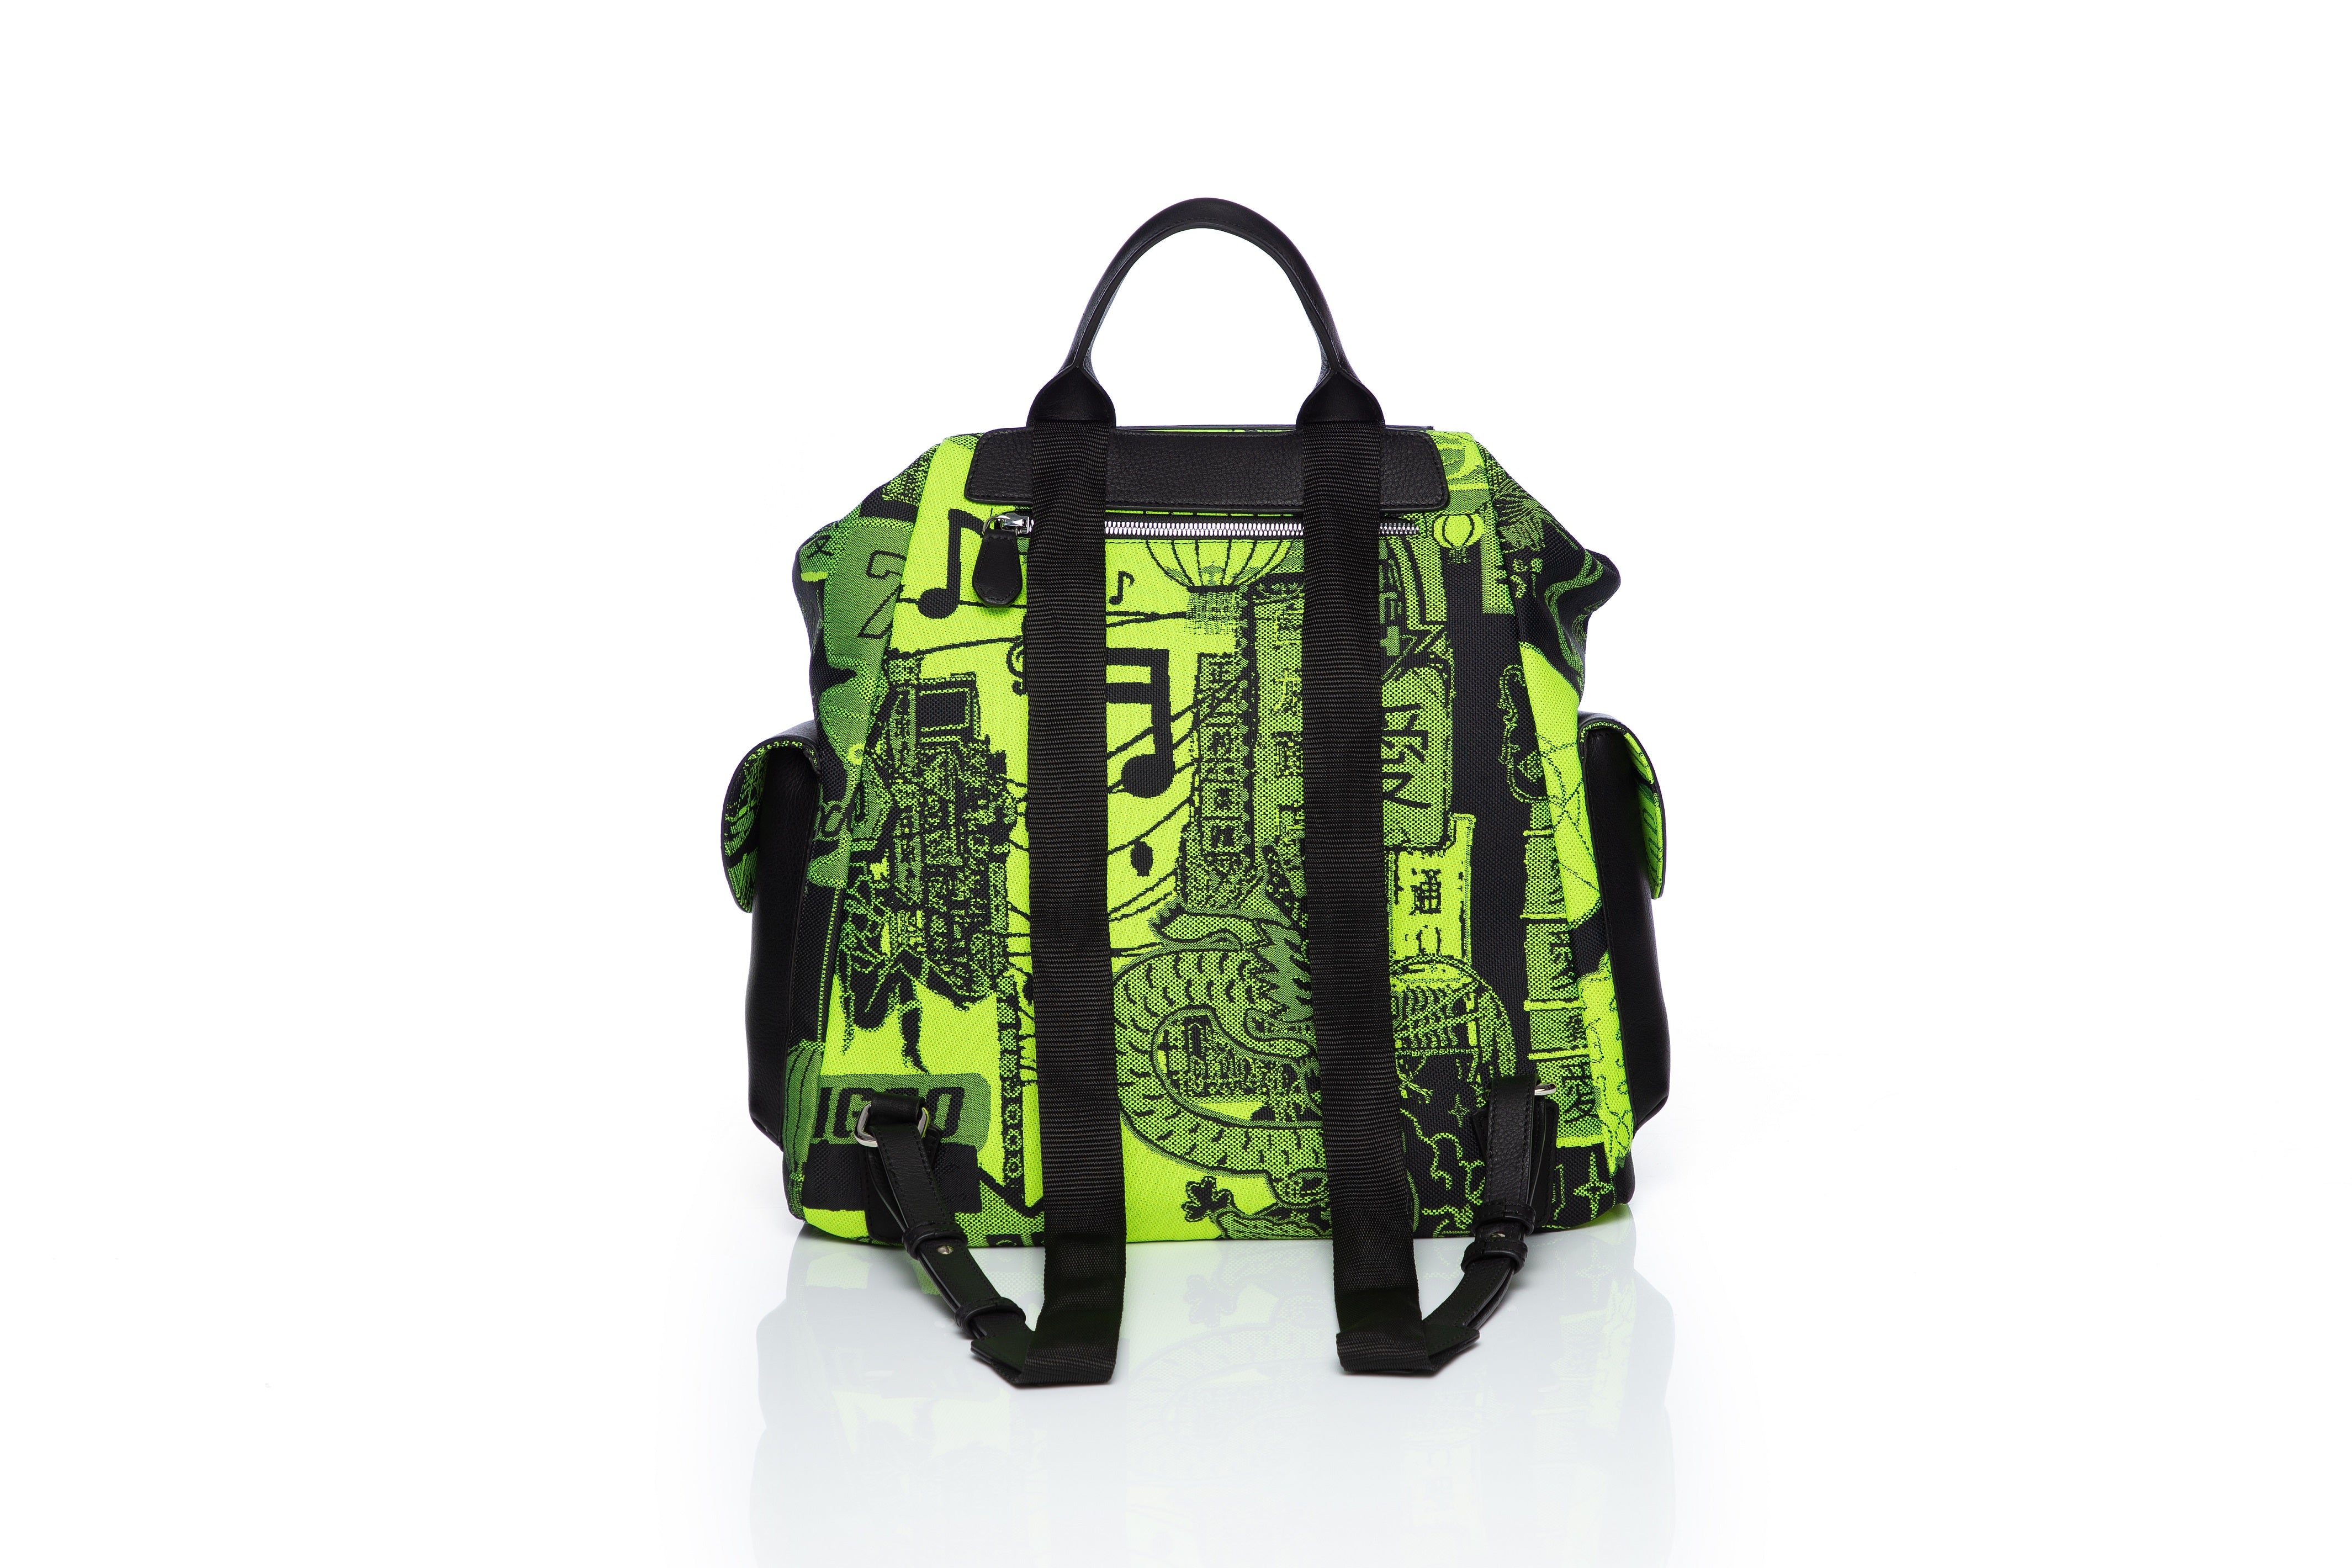 Zaino tascabile verde fluo Save The Forests